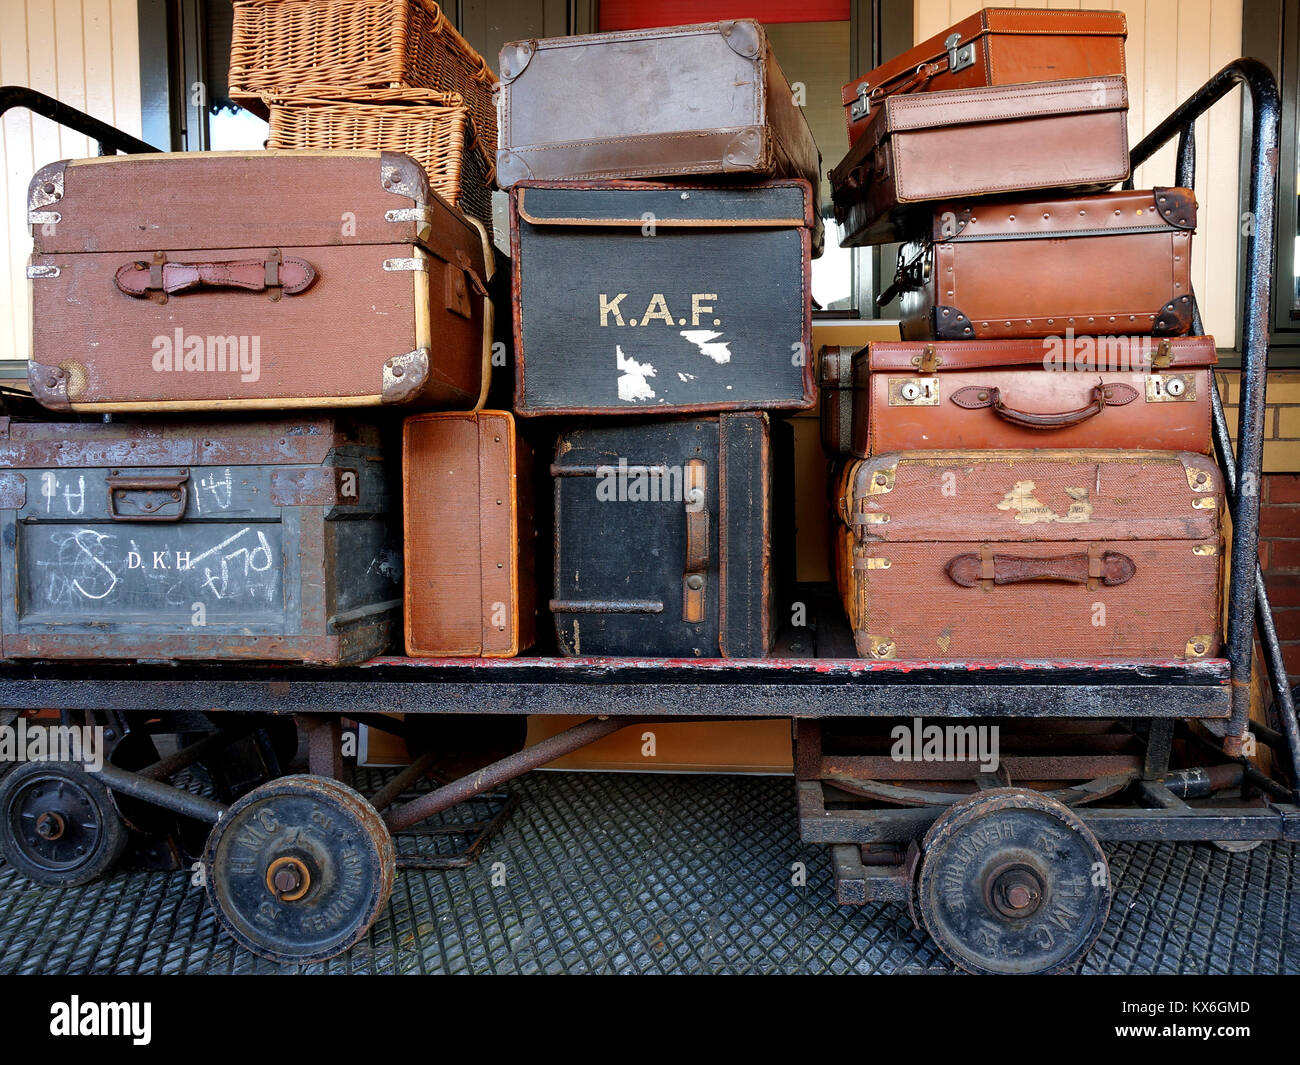 Black and brown vintage travel suitcases stacked on a railway trolley. Stock Photo